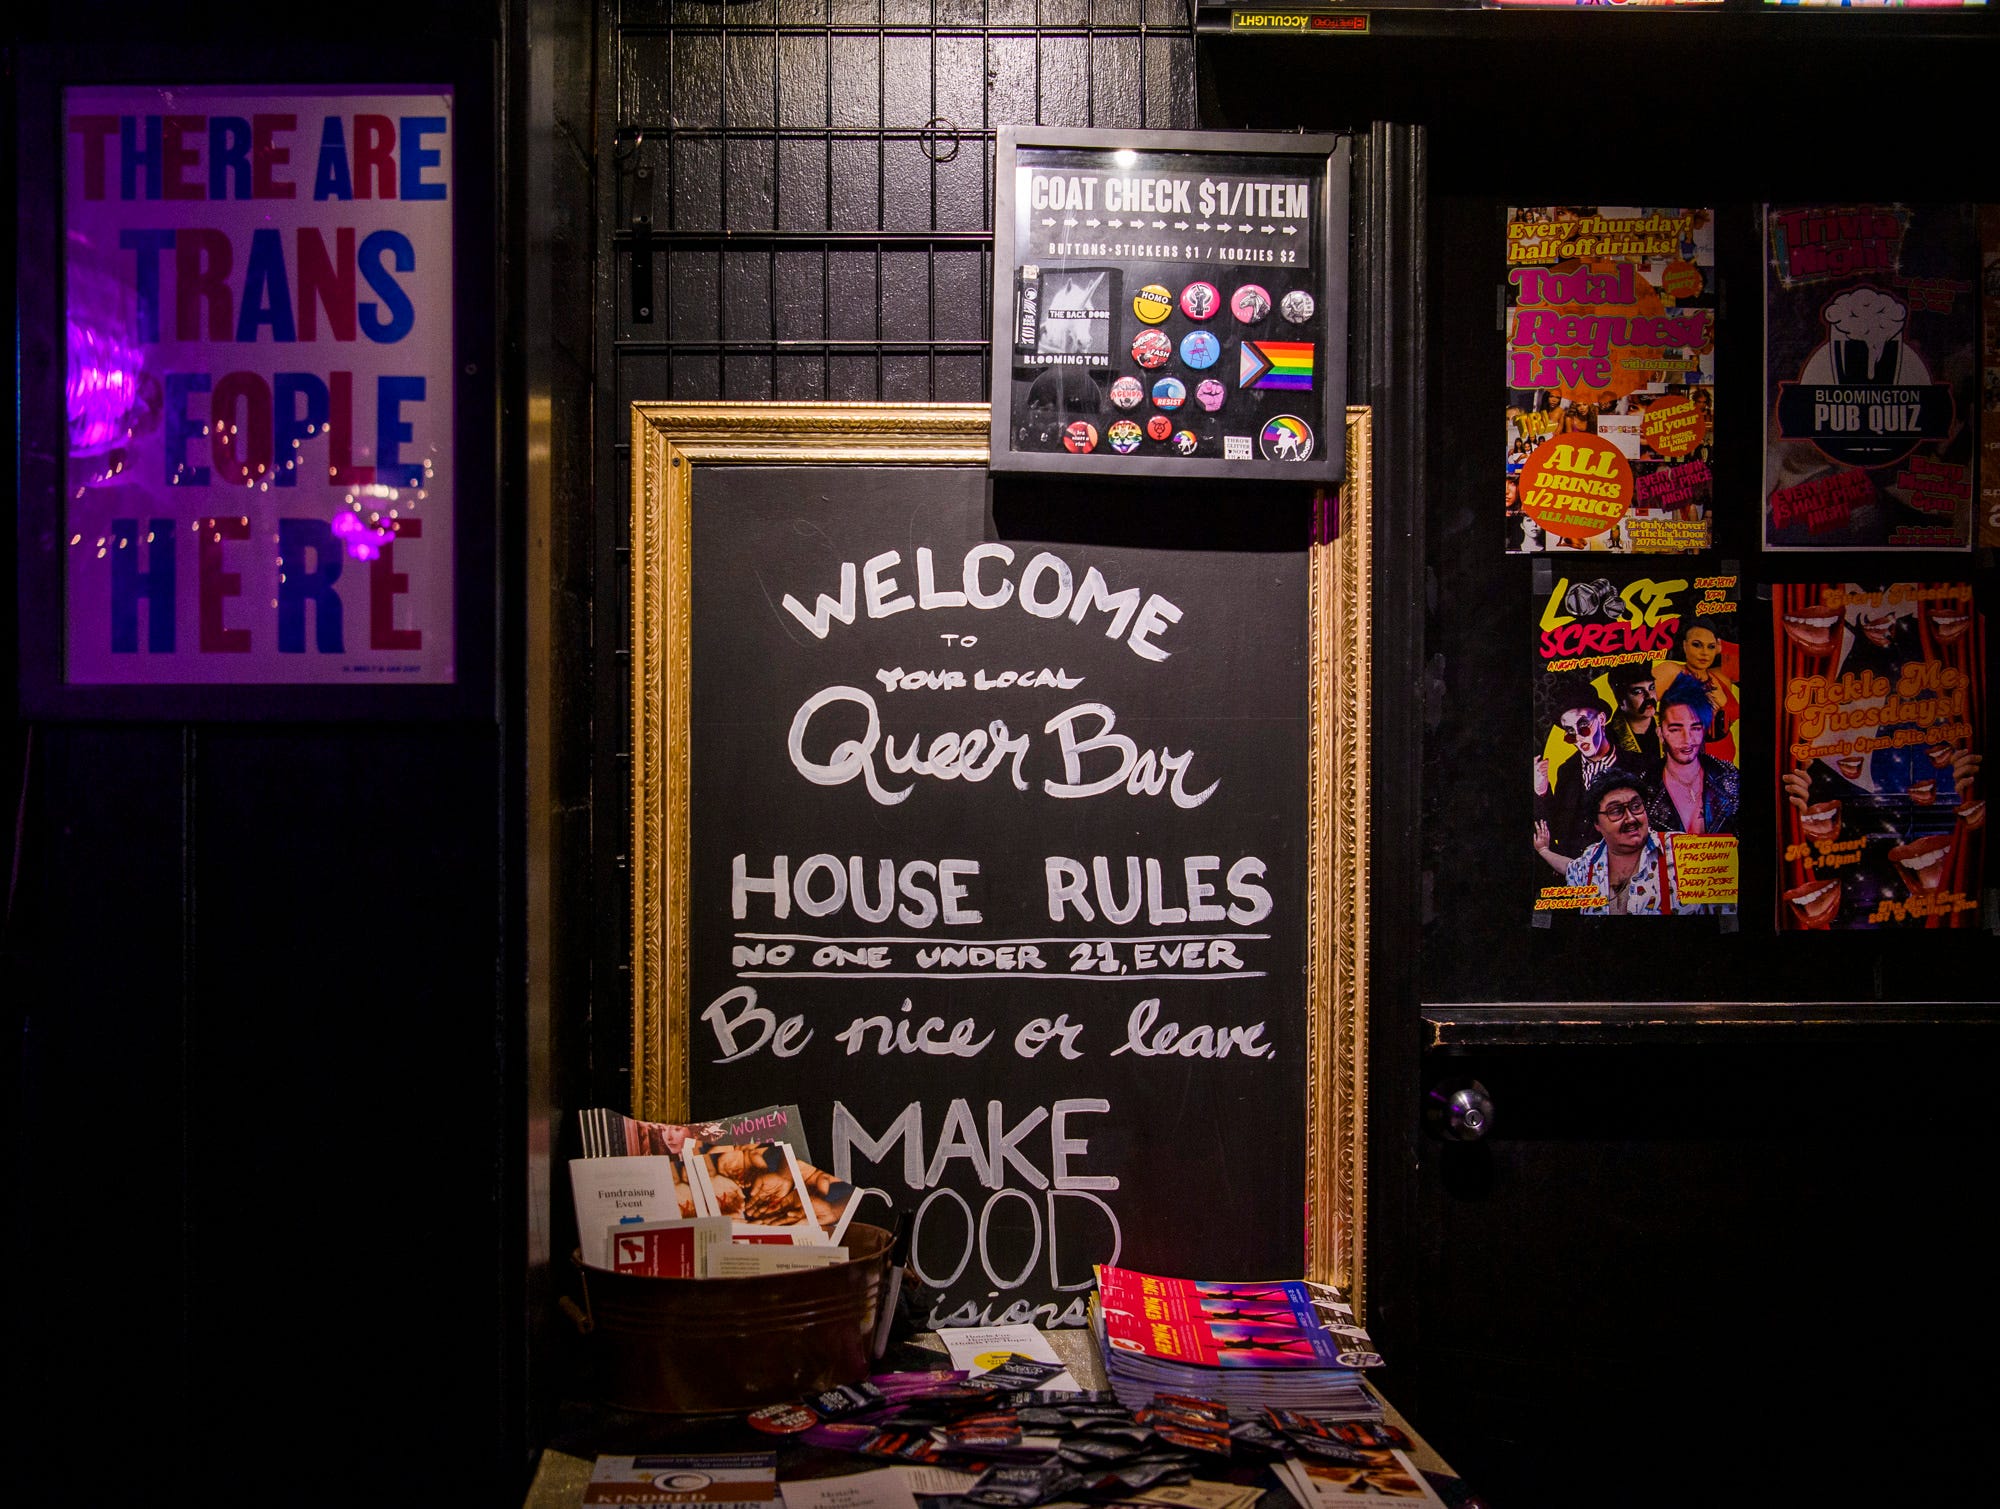 Lesbian bars have closed but are evolving into queer spaces